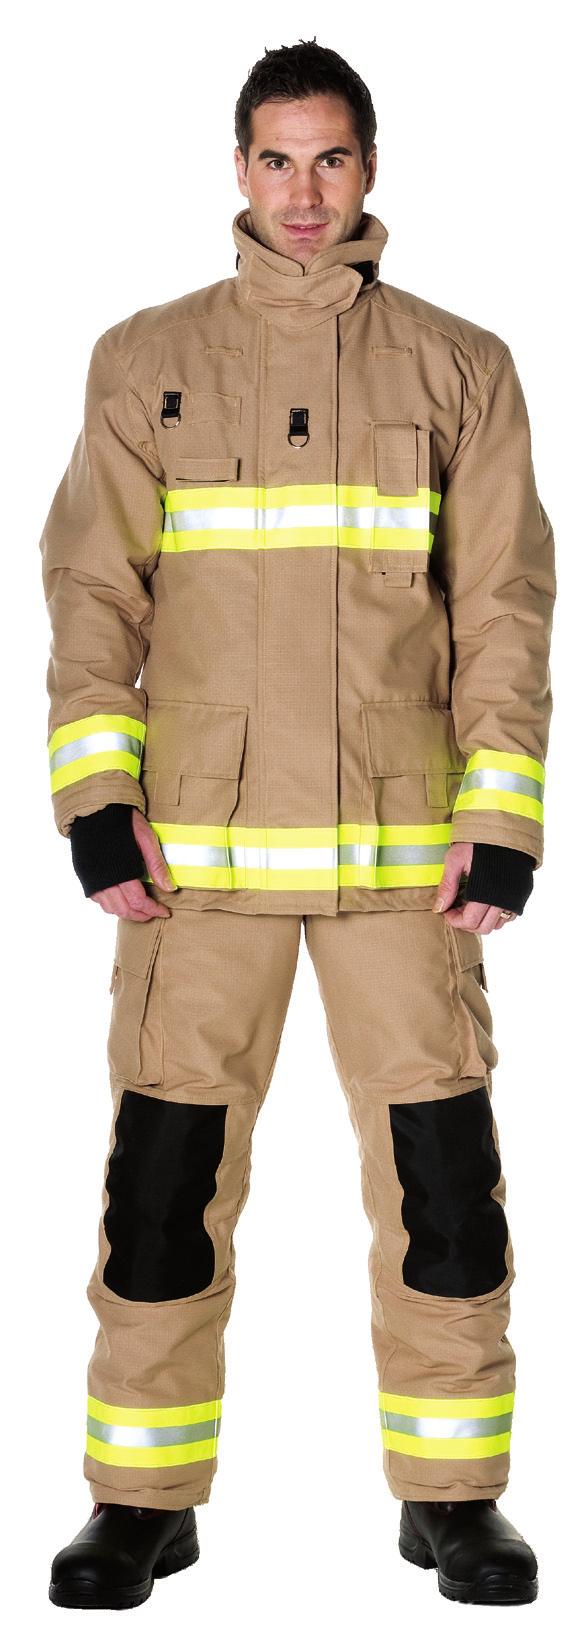 North American style - NFPA Standard NFPA 1971 Based on the Ergotech model, Bristol manufactures firefighter garments which meet the North American standard NFPA.